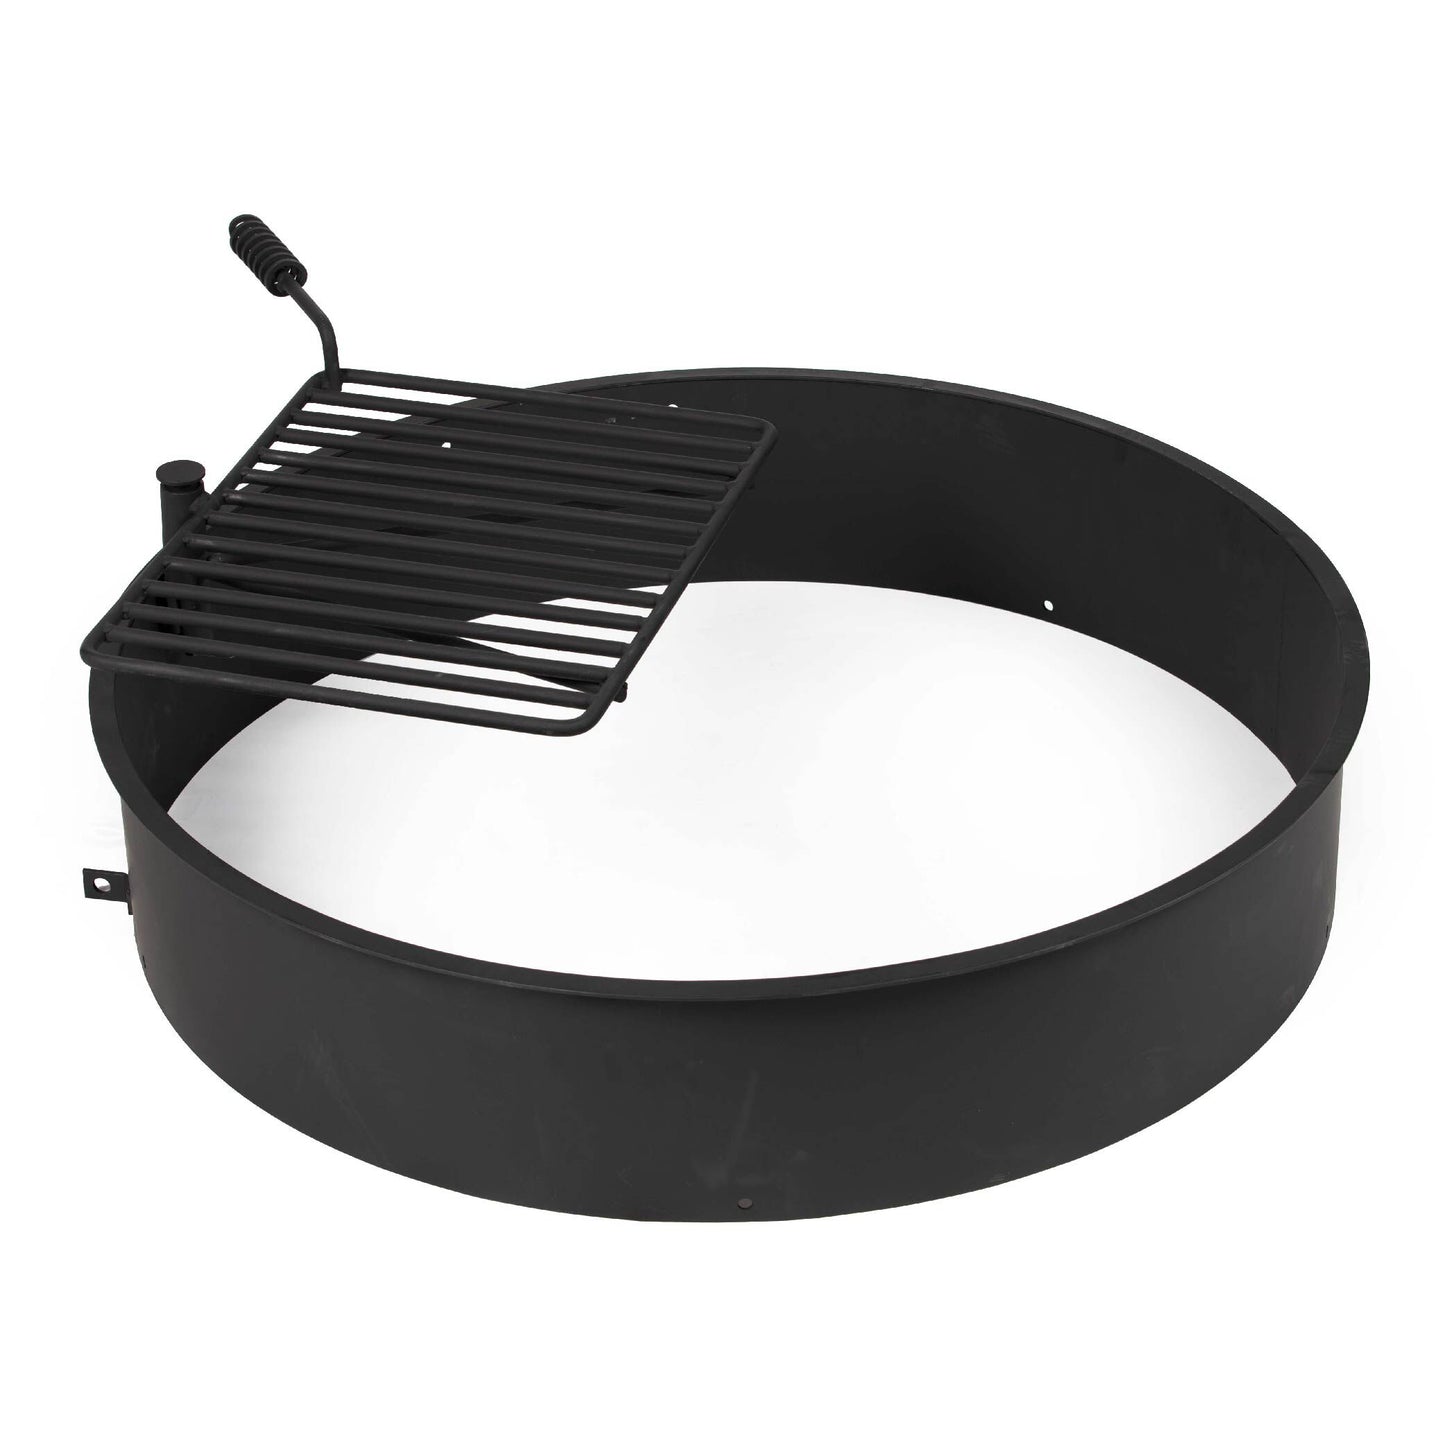 Steel Camp Fire Ring & Outdoor Cooking Grate - Fire Ring Size: 36" | 36" - view 13